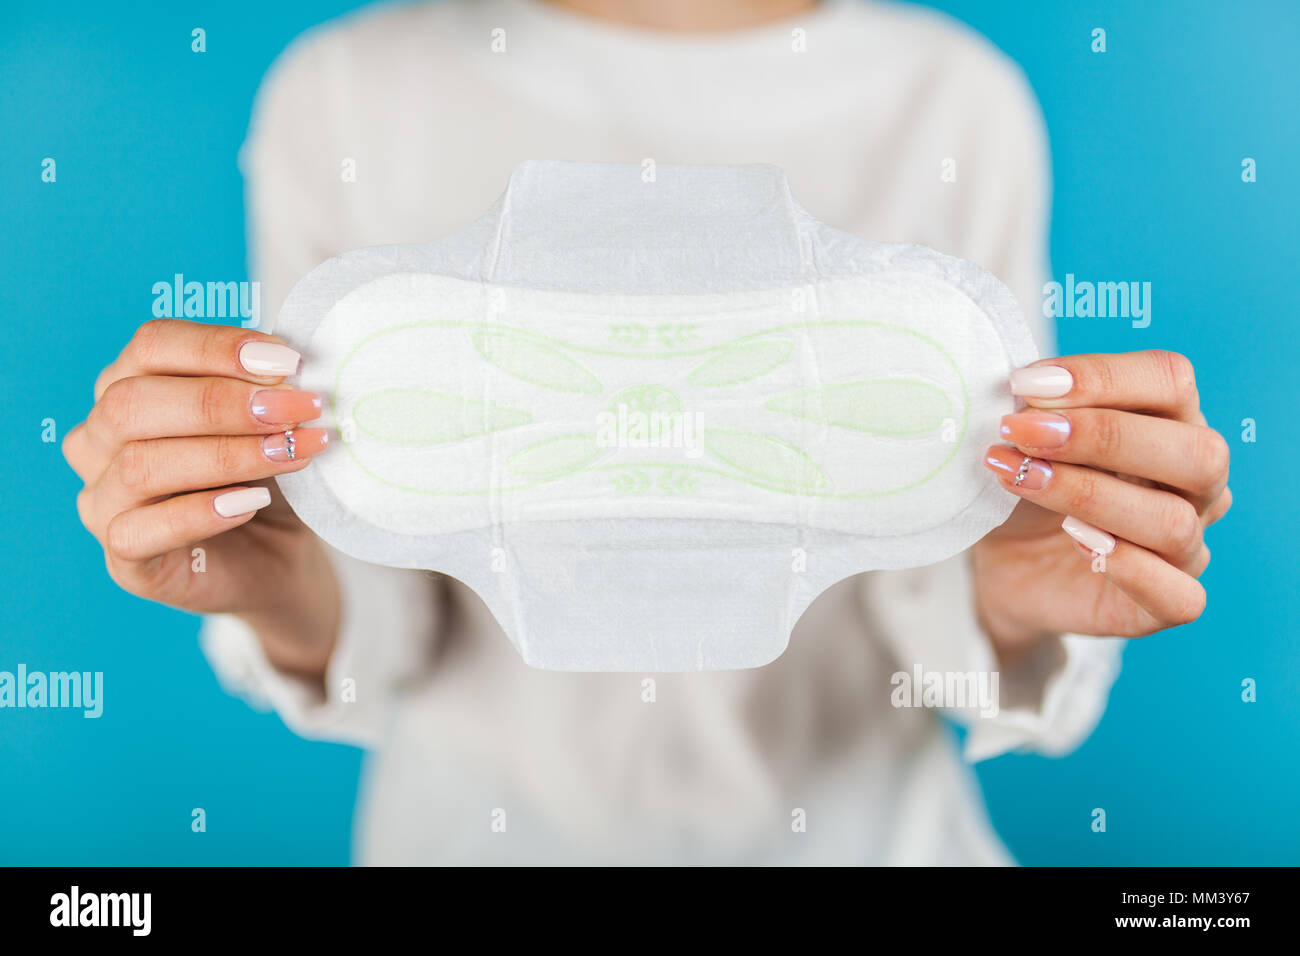 Woman holding a pad Stock Photo